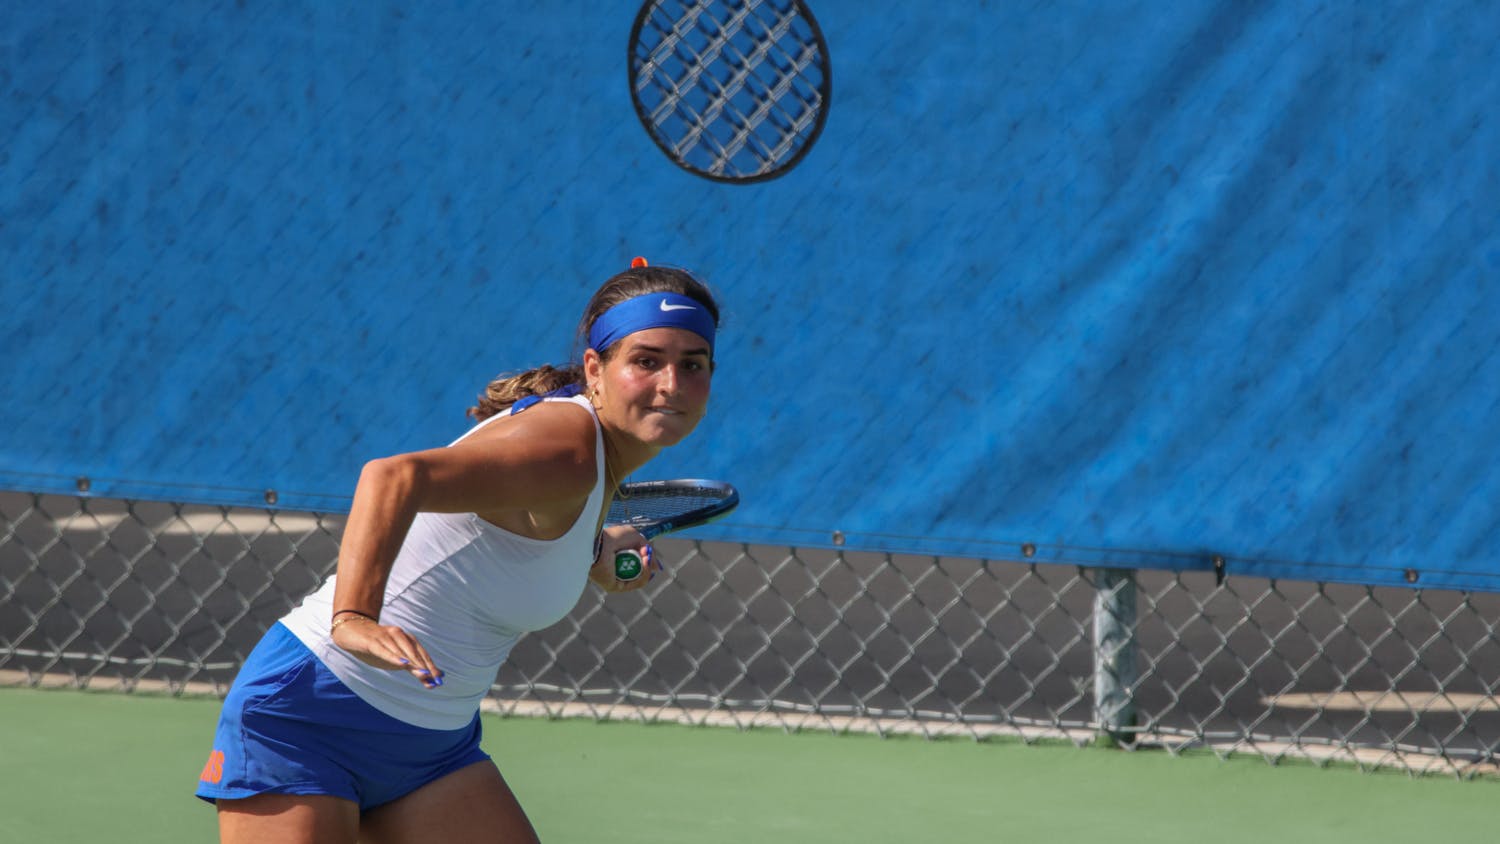 Gators sophomore Emily De Oliveira prepares to hit the ball in a 4-1 victory against the Michigan Wolverines Wednesday, March 22, 2023.